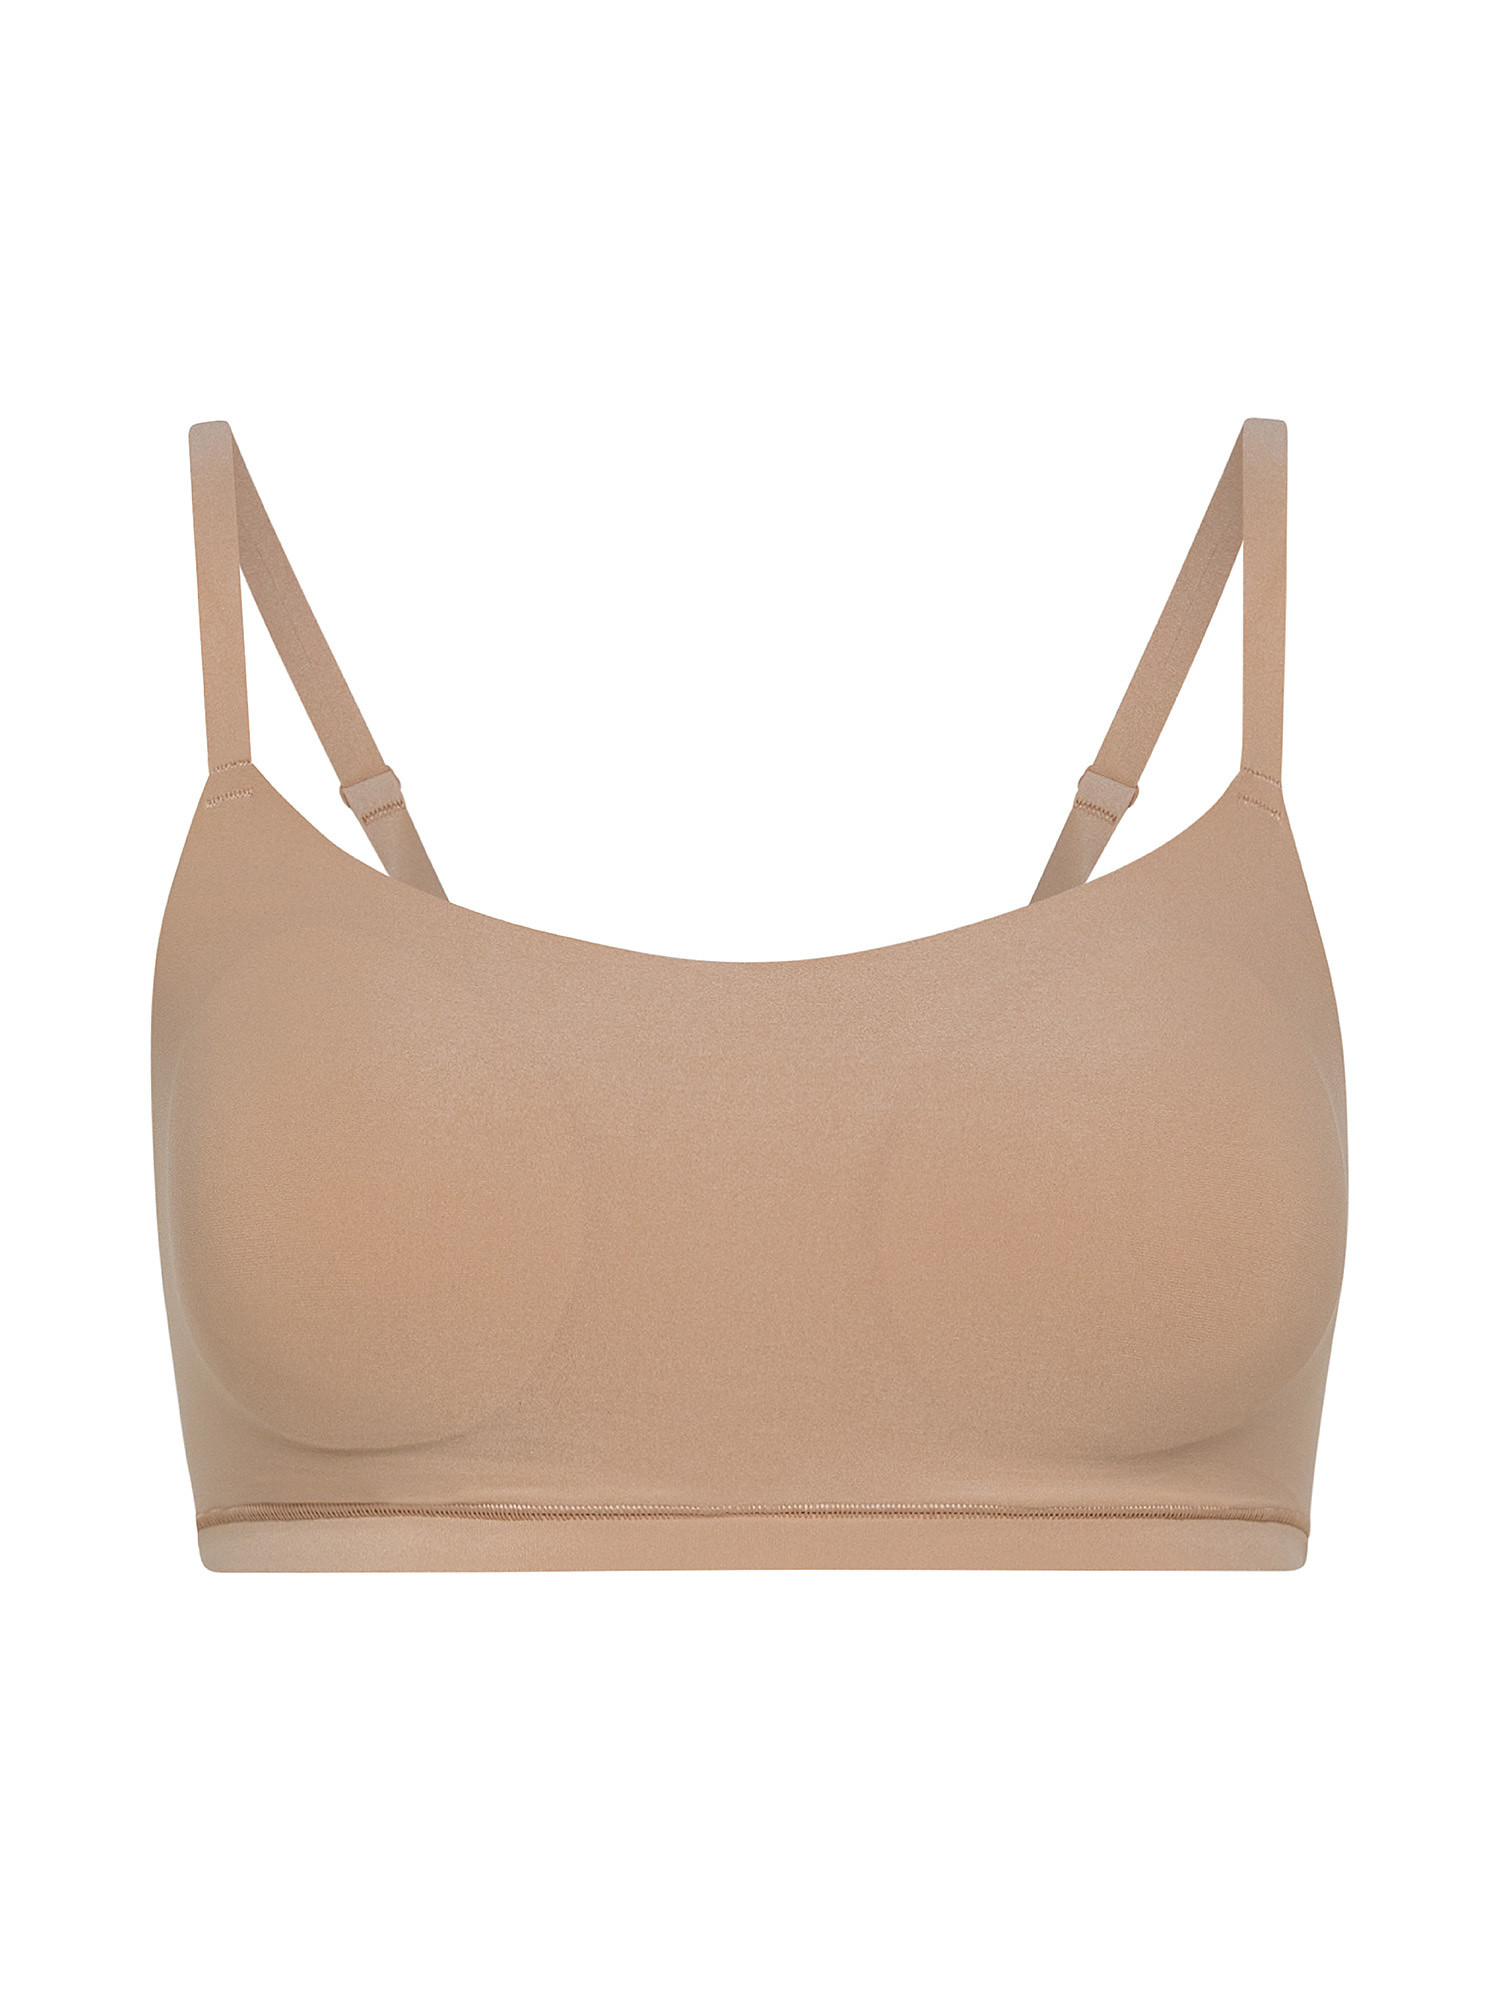 Brassière with rounded neckline, Nude, large image number 0